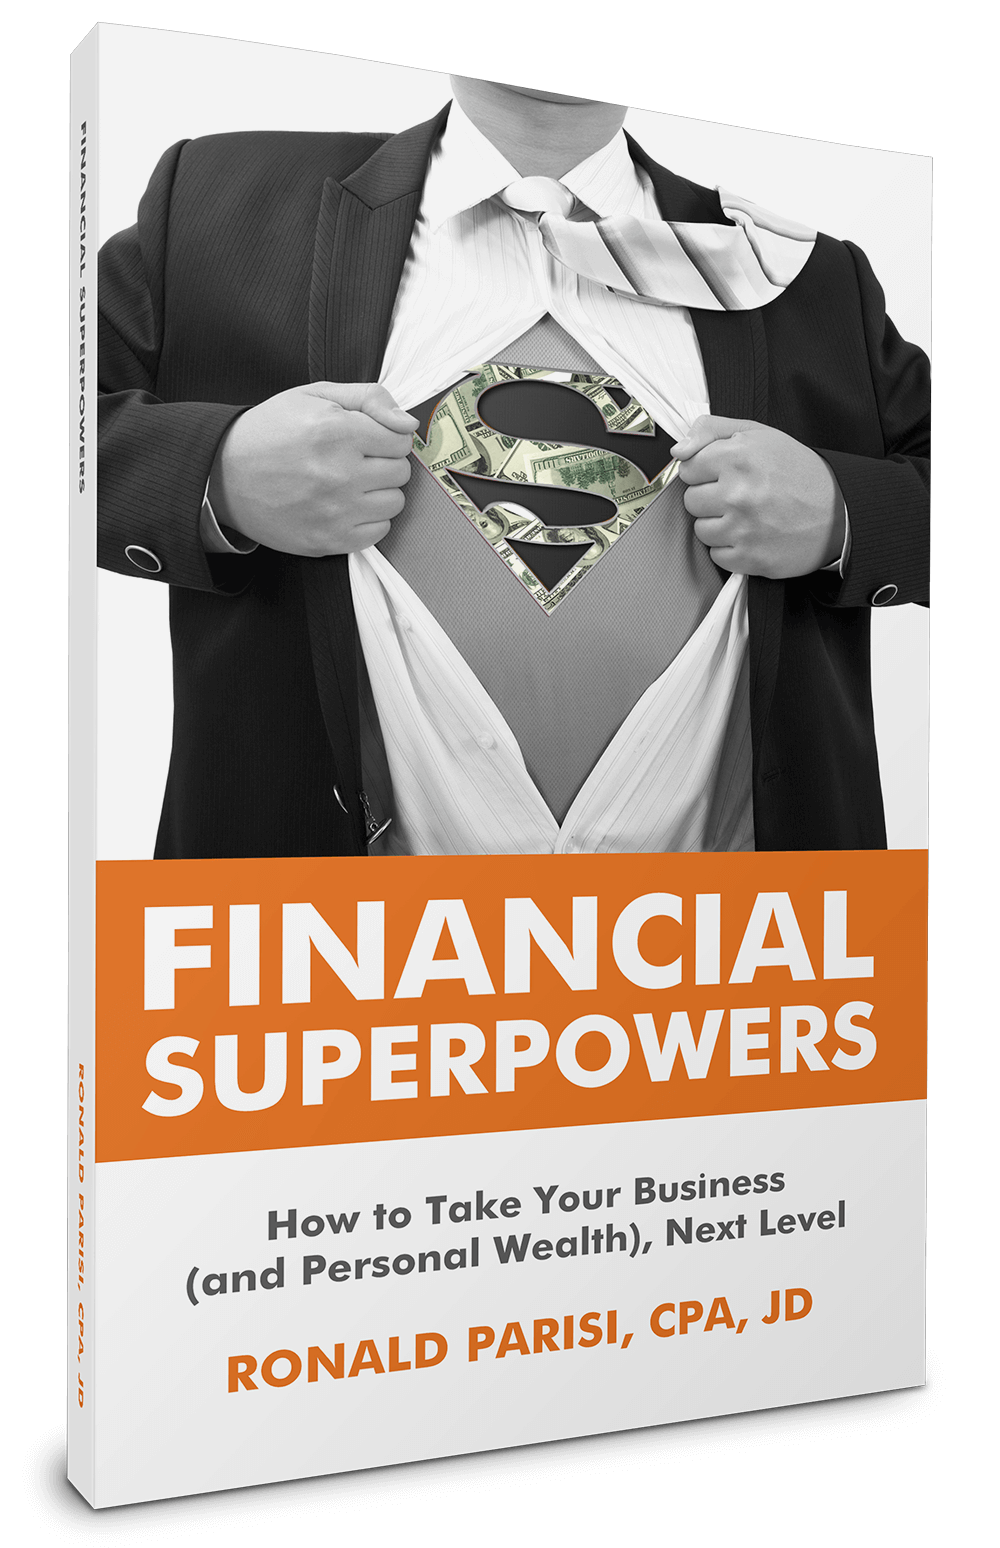 financial superpowers pdf img